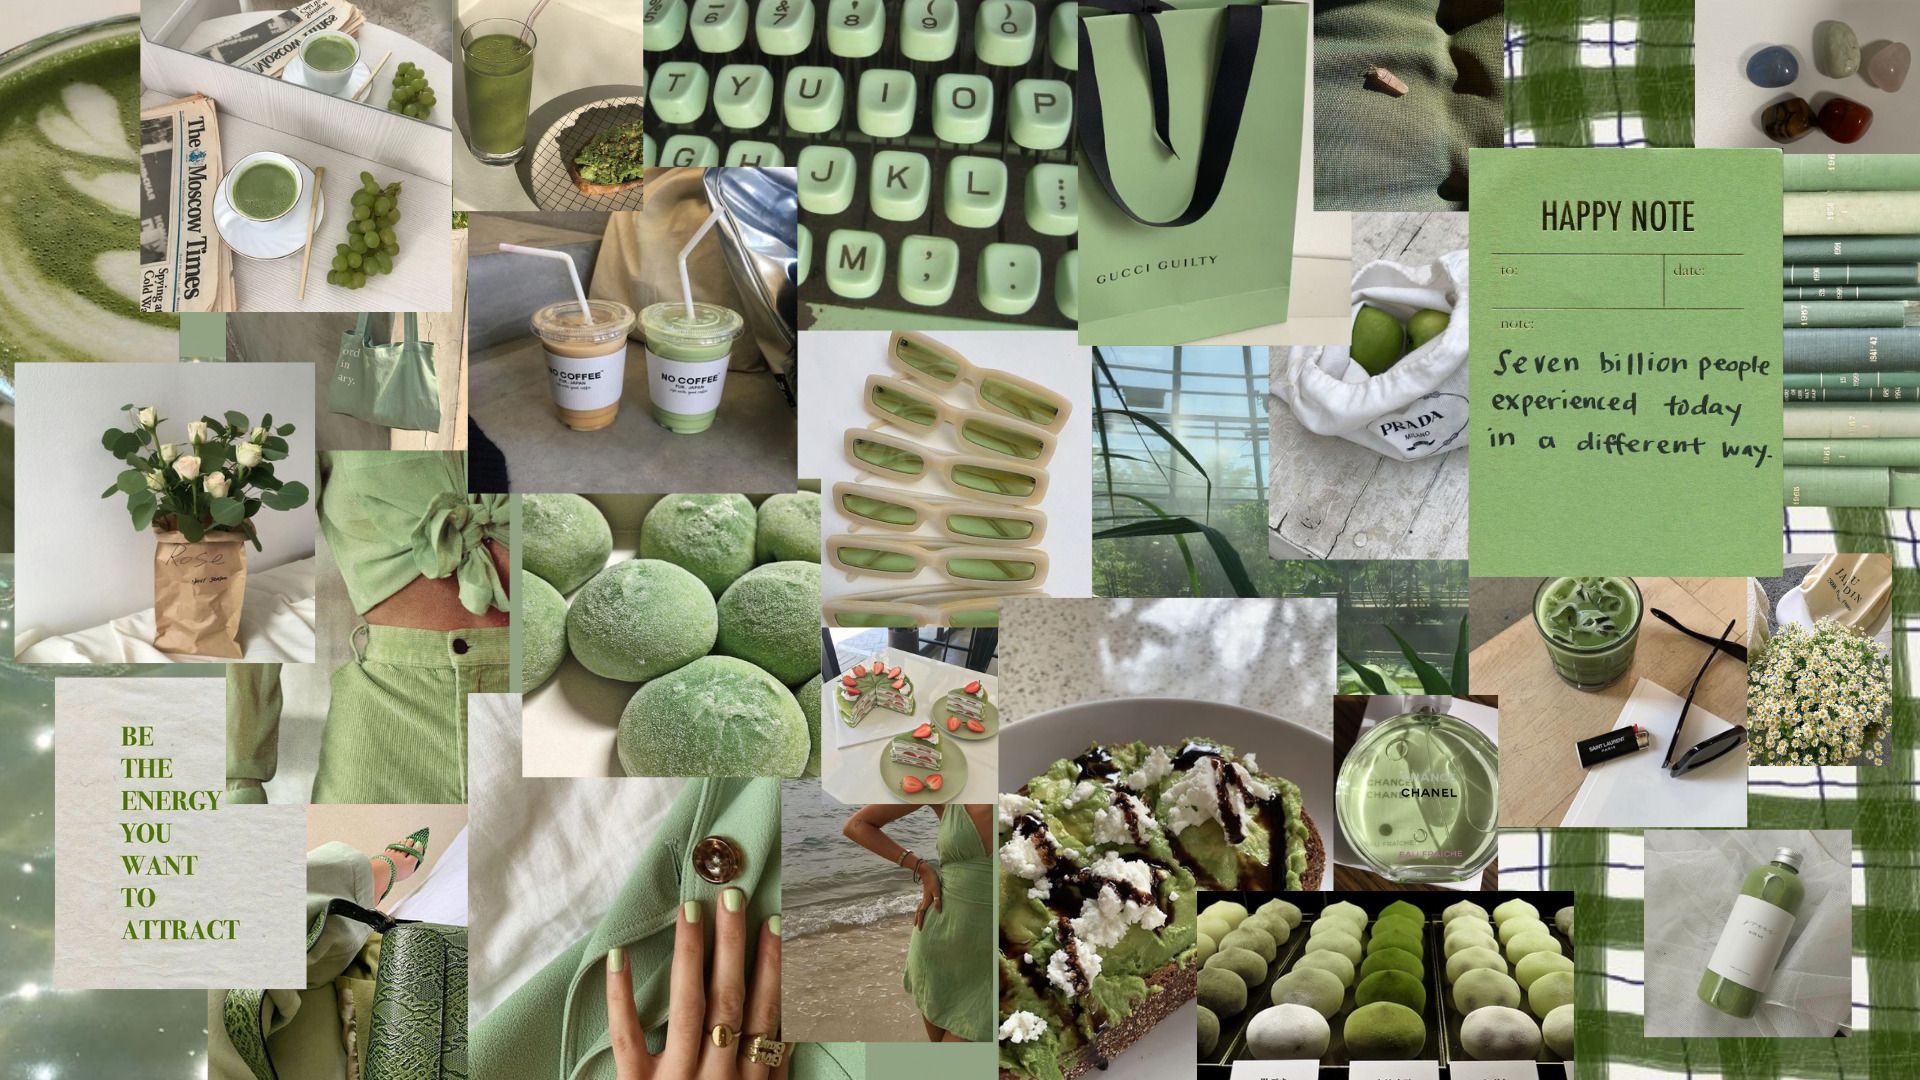 The world's best quality 4k, 8k, wallpaper at PixeWall.com, Aesthetic Collage Sage Green Wal. Sage green wallpaper, Green wallpaper, Aesthetic desktop wallpaper